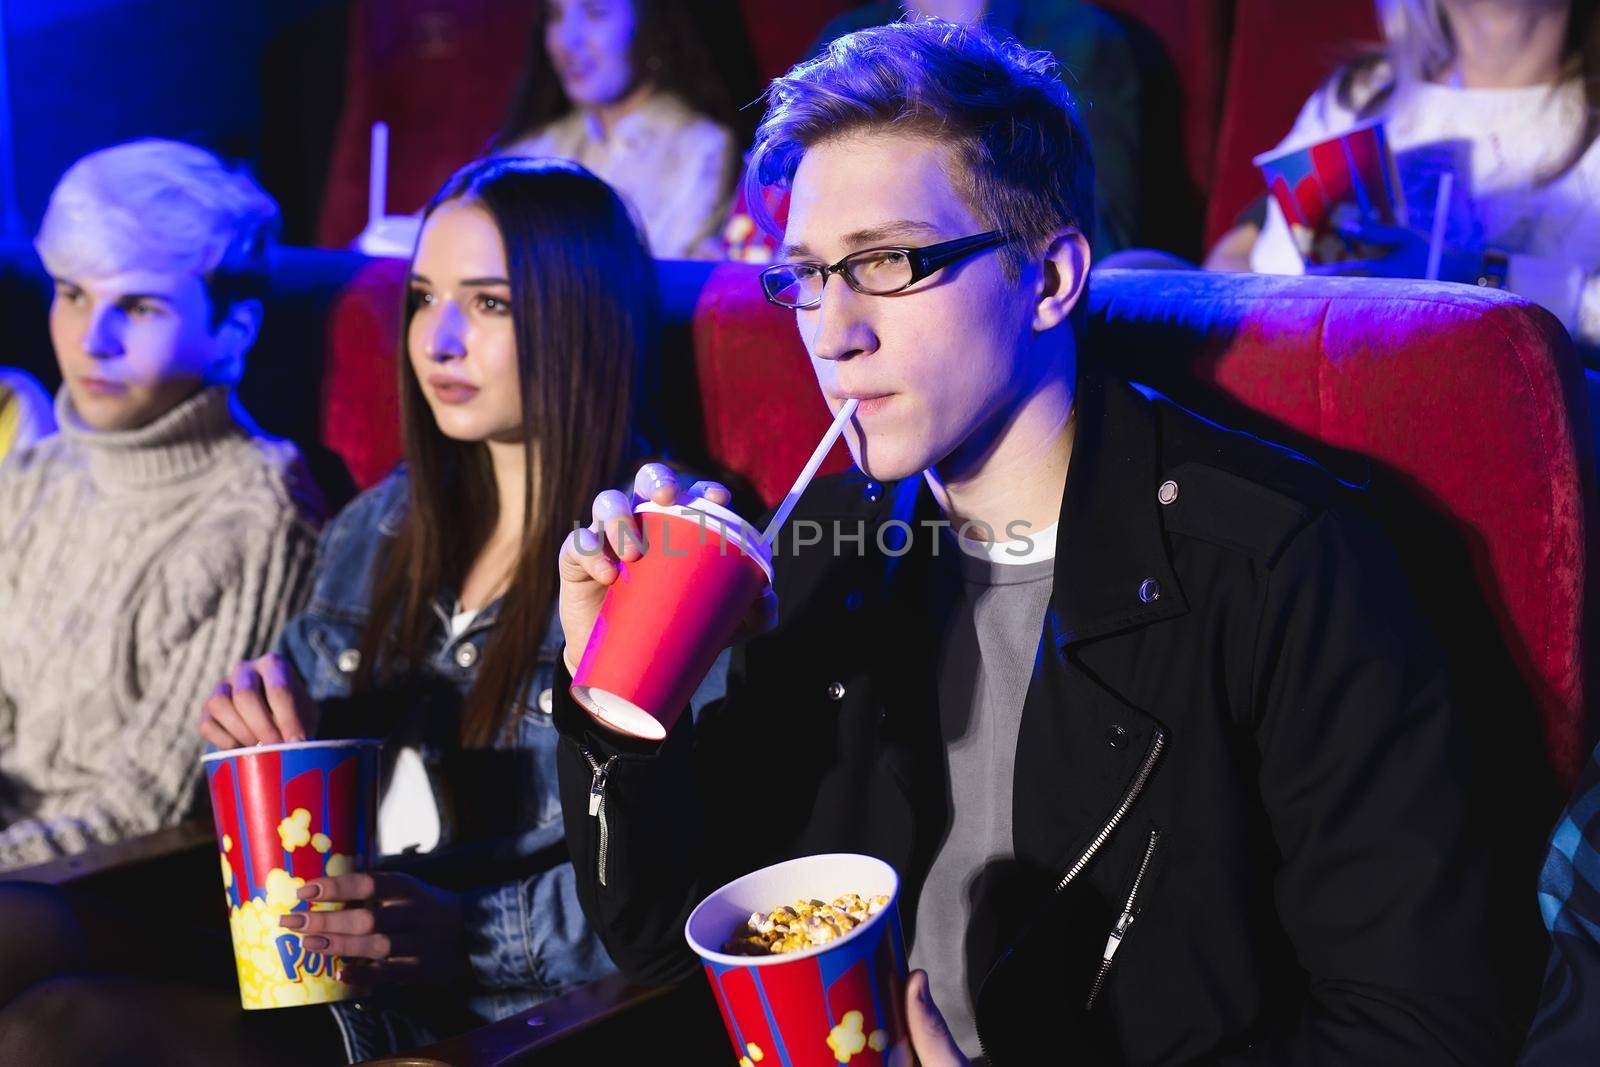 Young man drinks from a red Cup in the cinema.